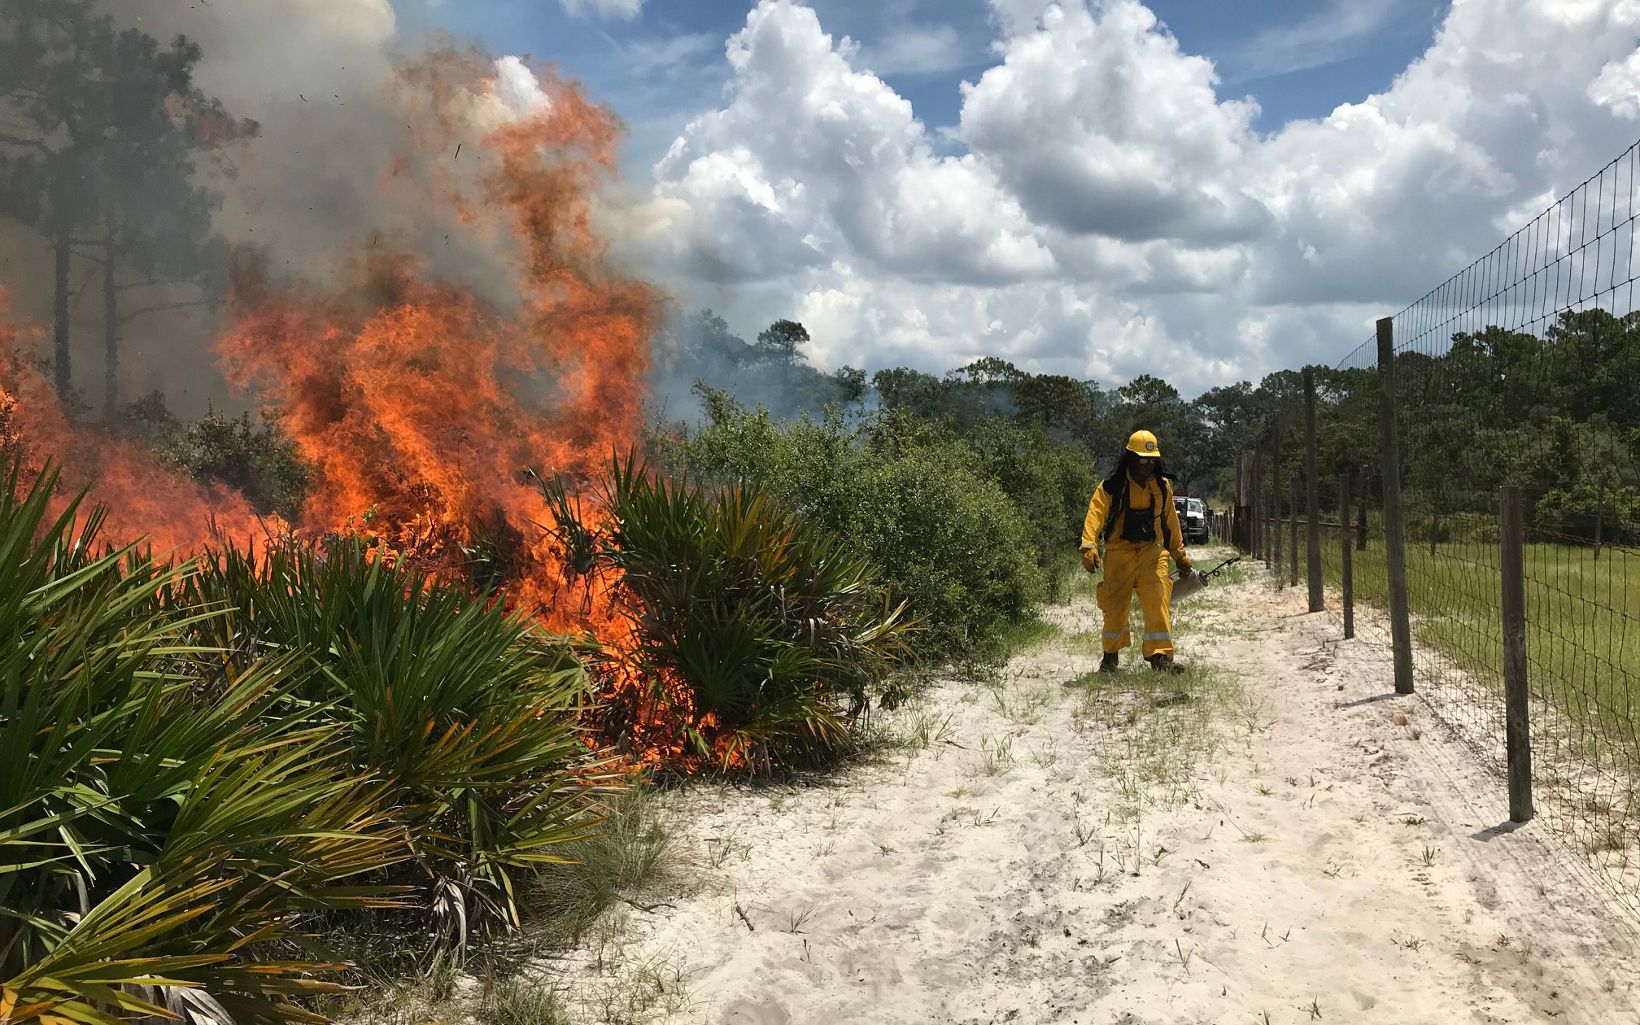 Prescribed fire practitioners from the Bahamas hone their skills in Florida.